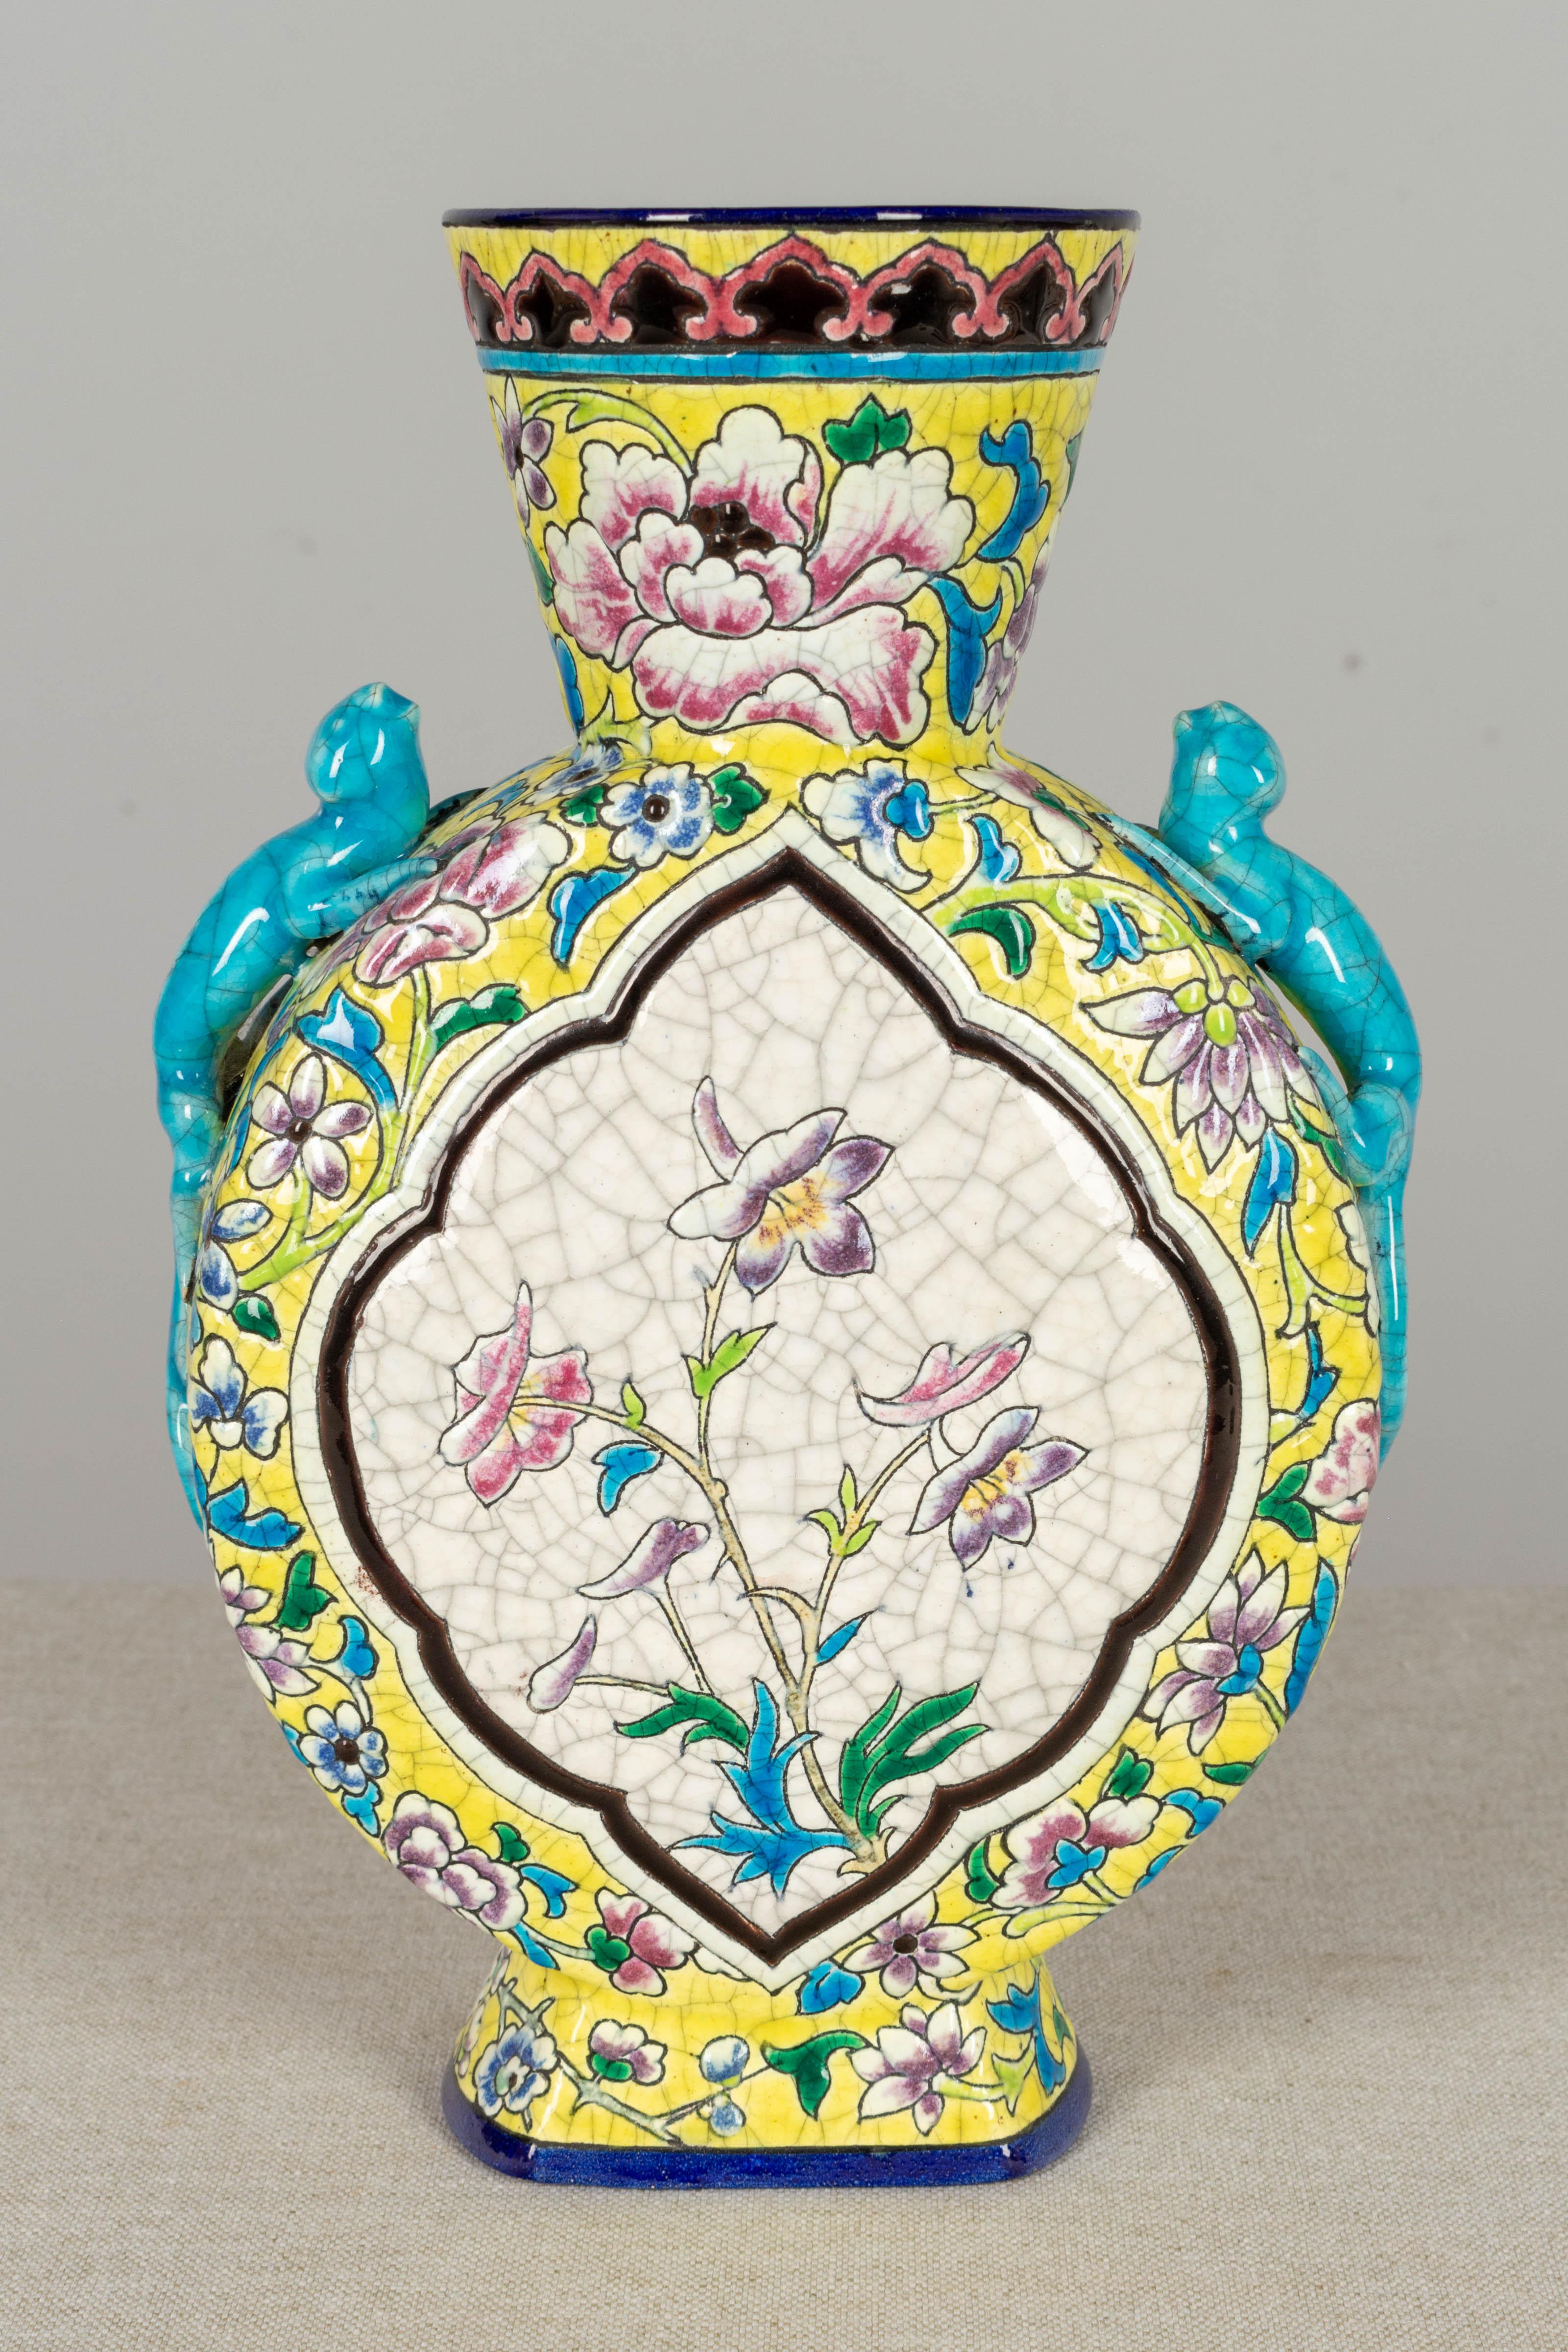 A late 19th century French Longwy chinoiserie ceramic vase, decorated in enamel cloisonné style. Flask shape with bright blue lizard form handles and a vignette on either side, one containing a bird perched on a branch and the other with flowers.